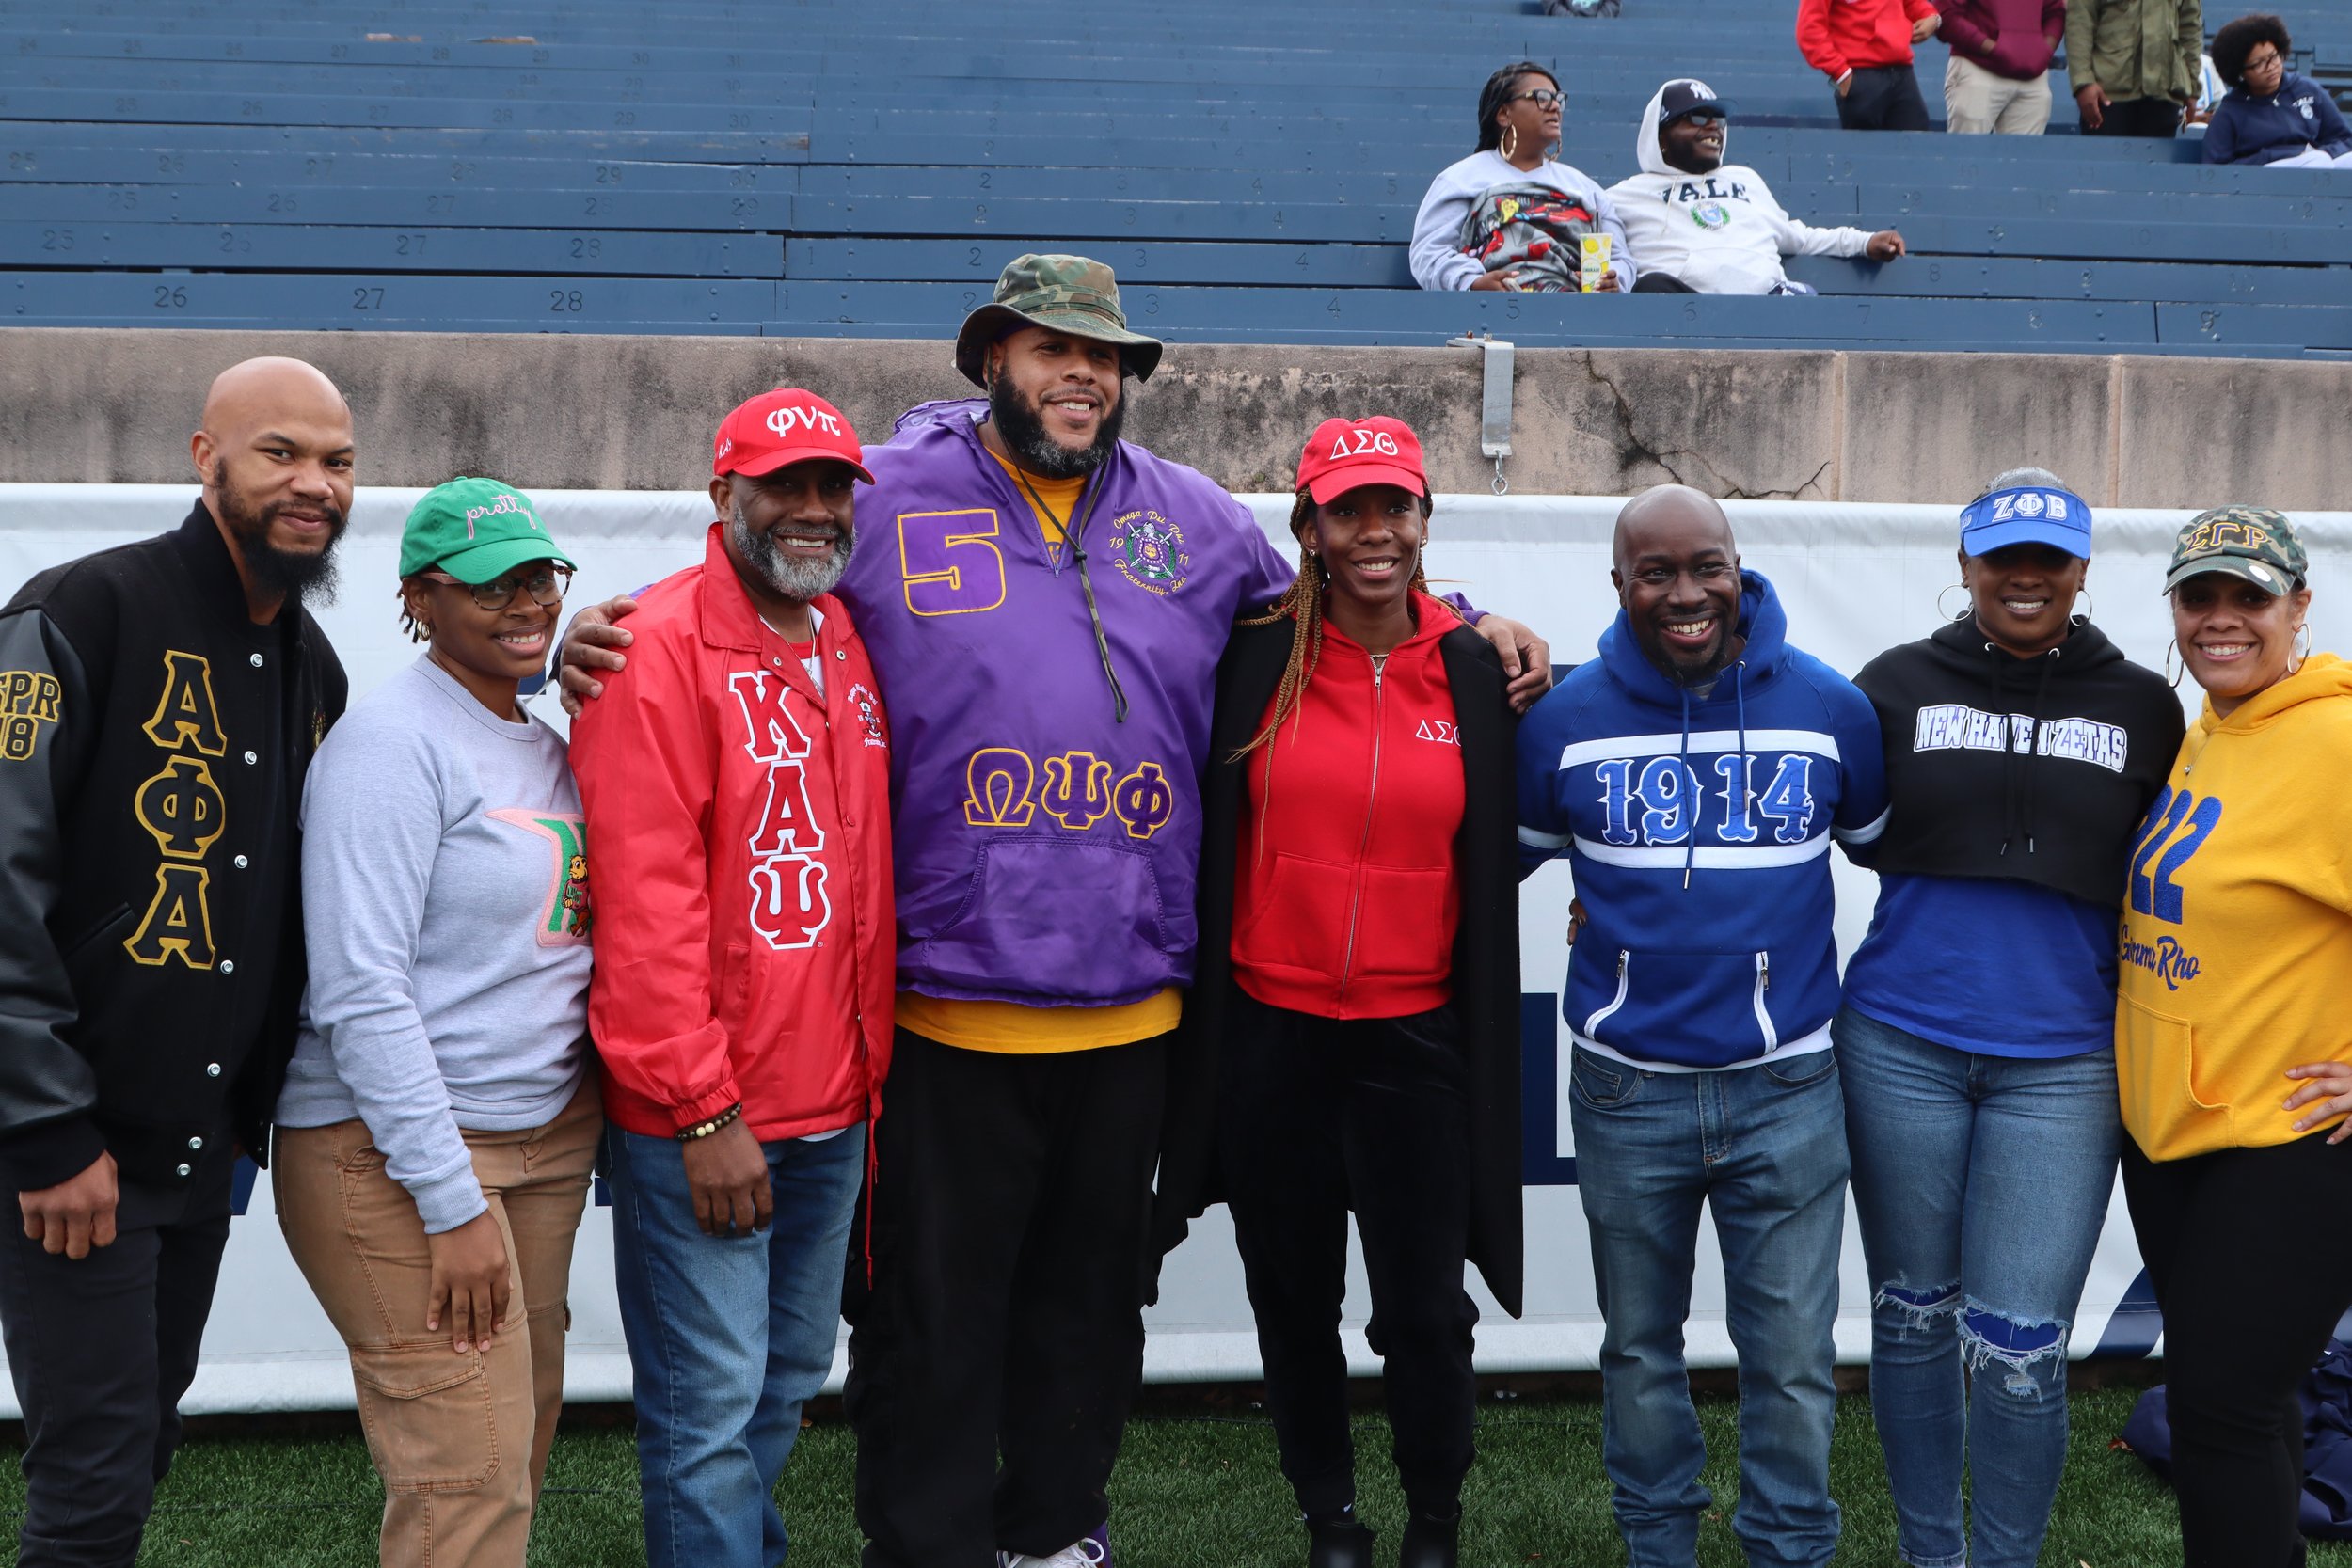 Brother Gray and D9 Greek Unity at the Harmony Classic